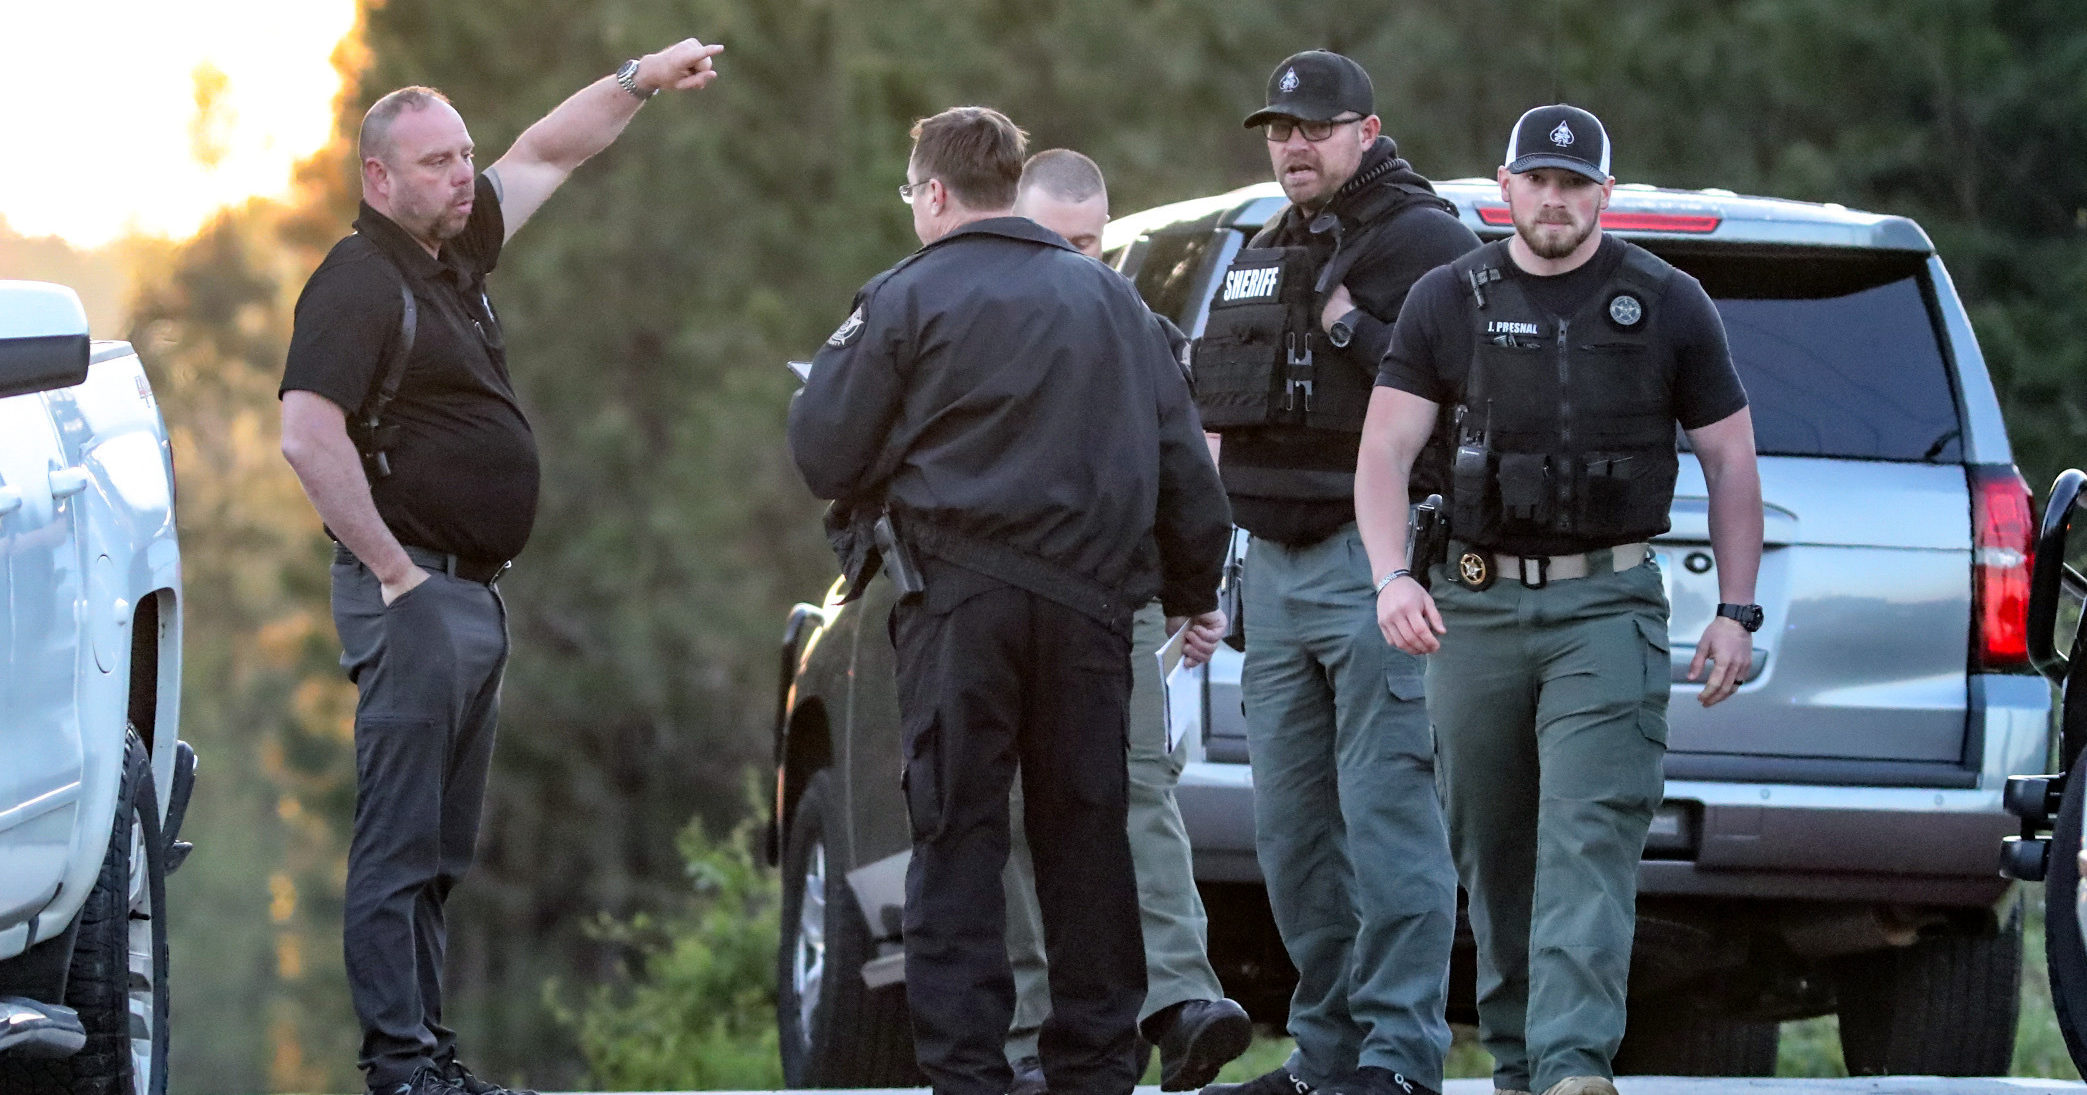 Law enforcement work the scene scene following a police chase Monday in Carroll County, Georgia.